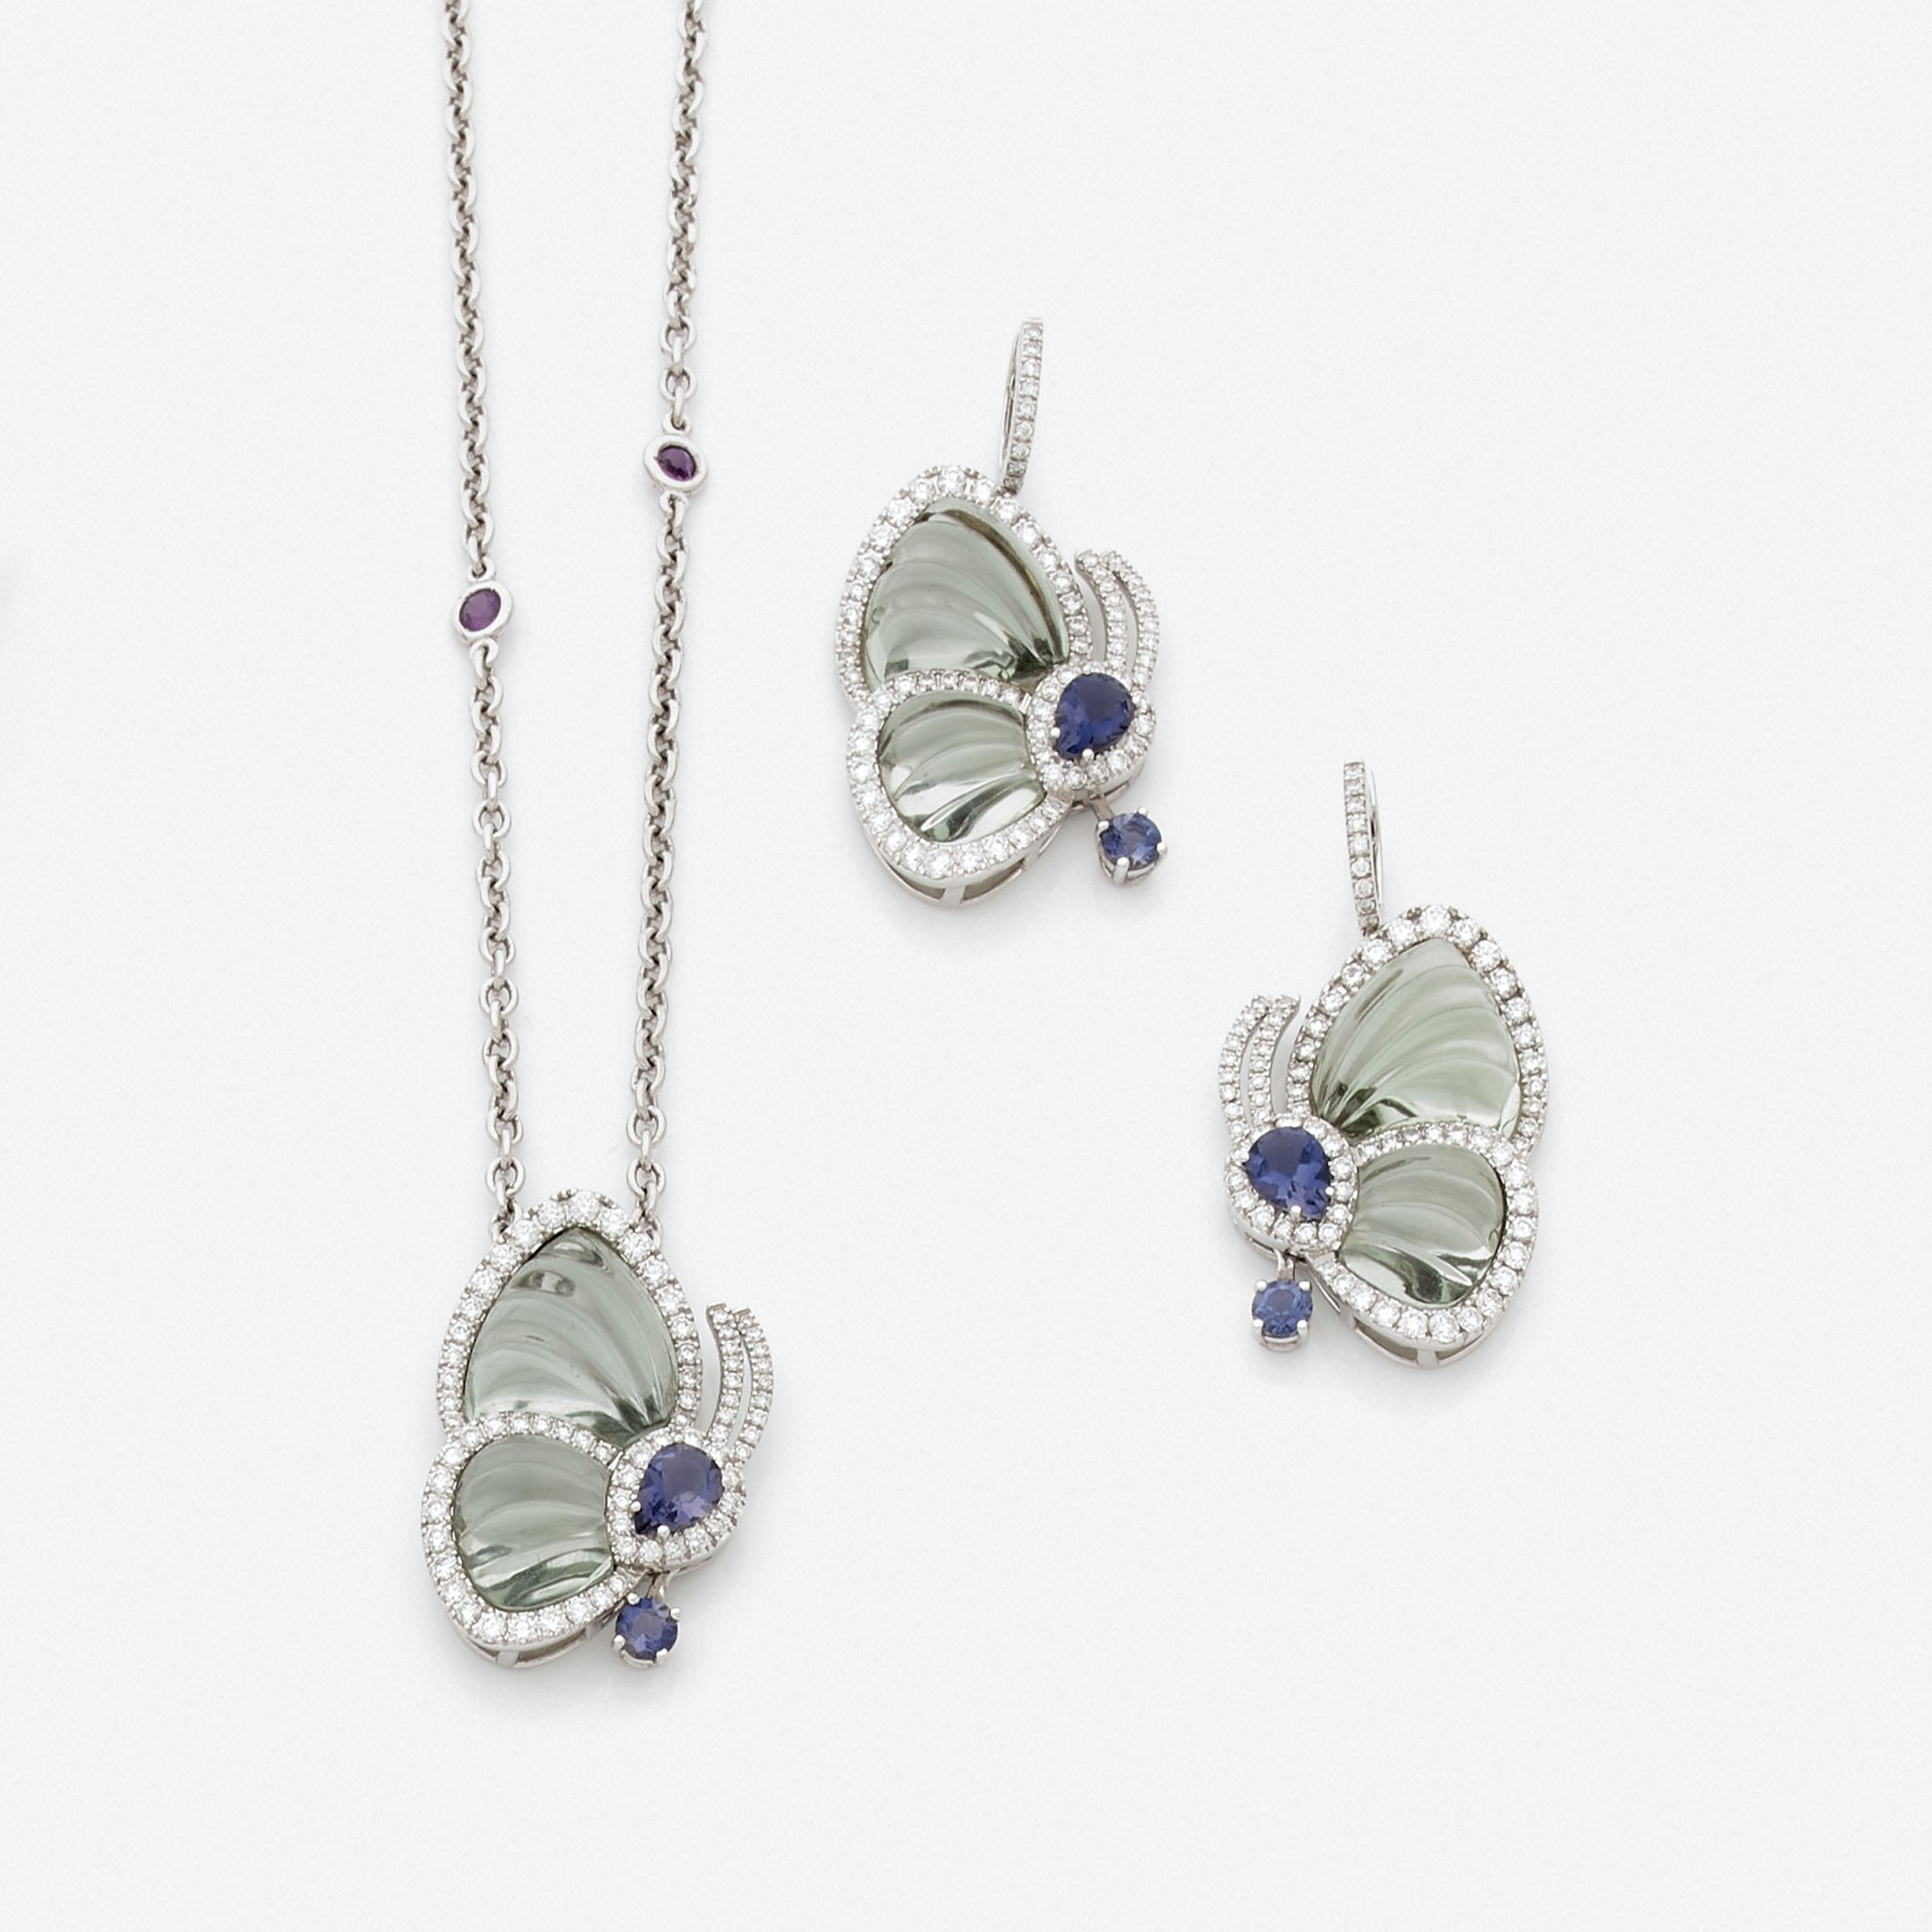 Jacob & Co. - The stunning Sapphire Diamond Necklace comes with